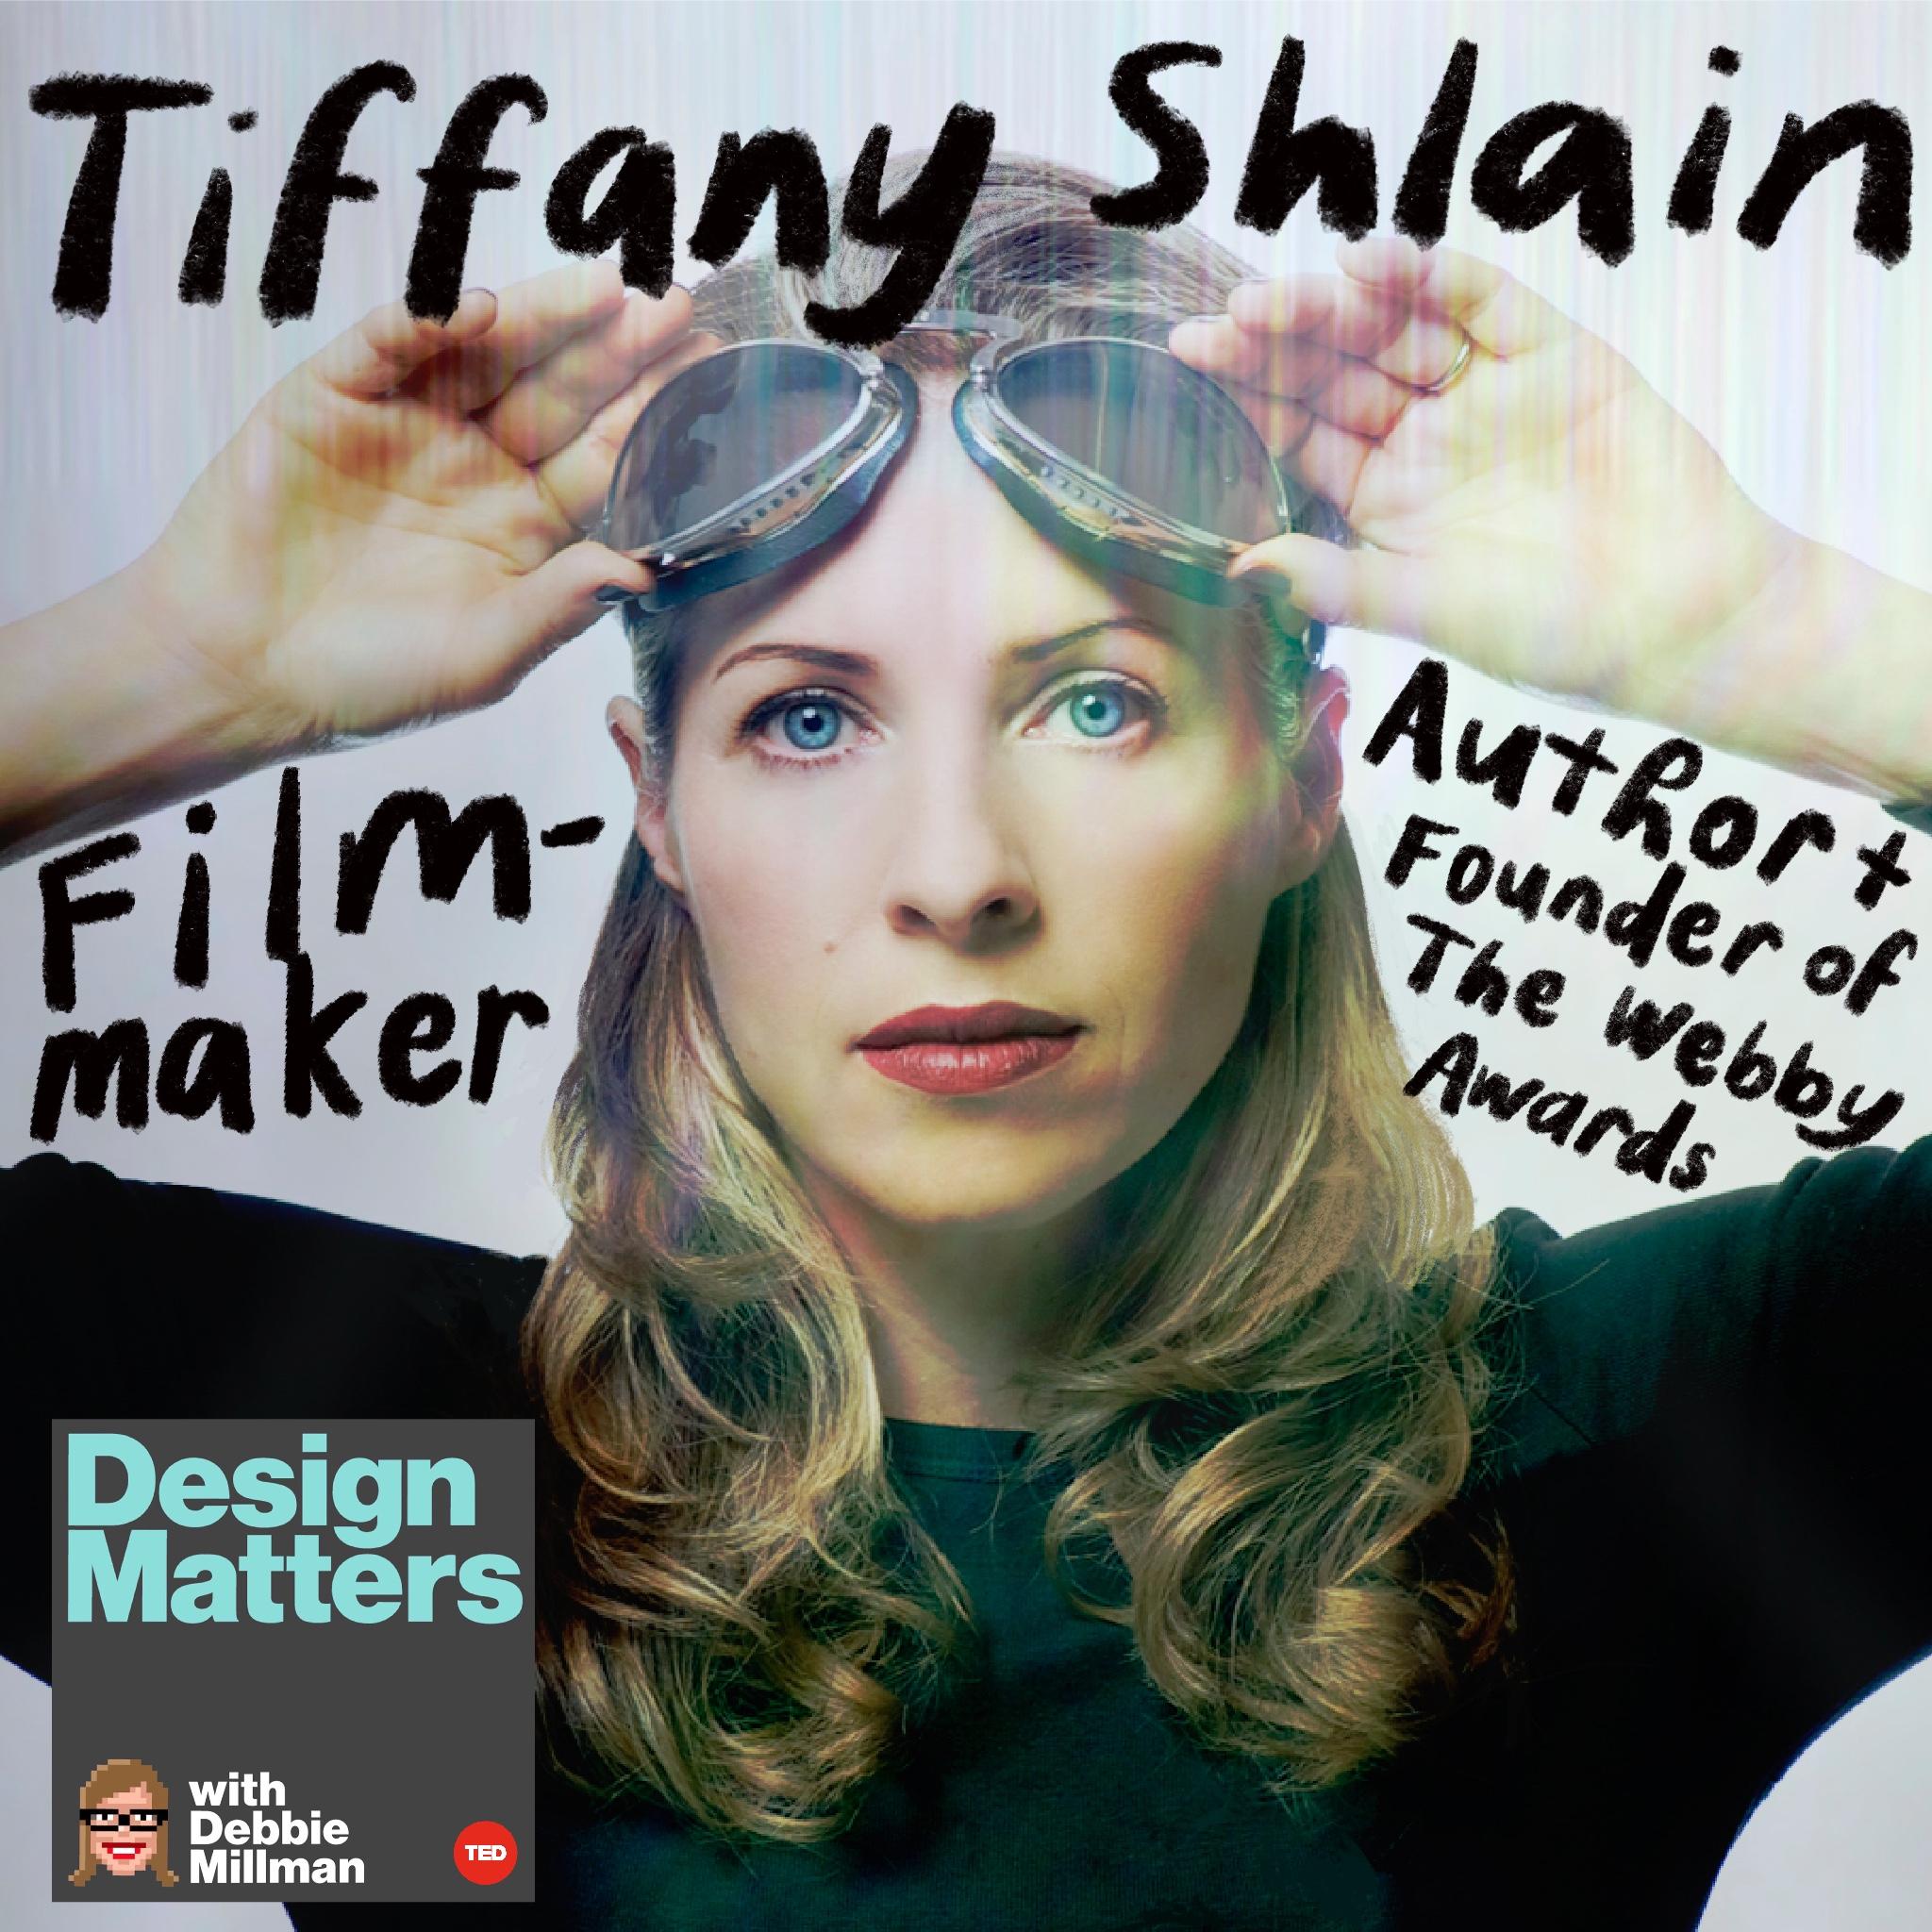 Thumbnail for "Design Matters From the Archive: Tiffany Shlain".